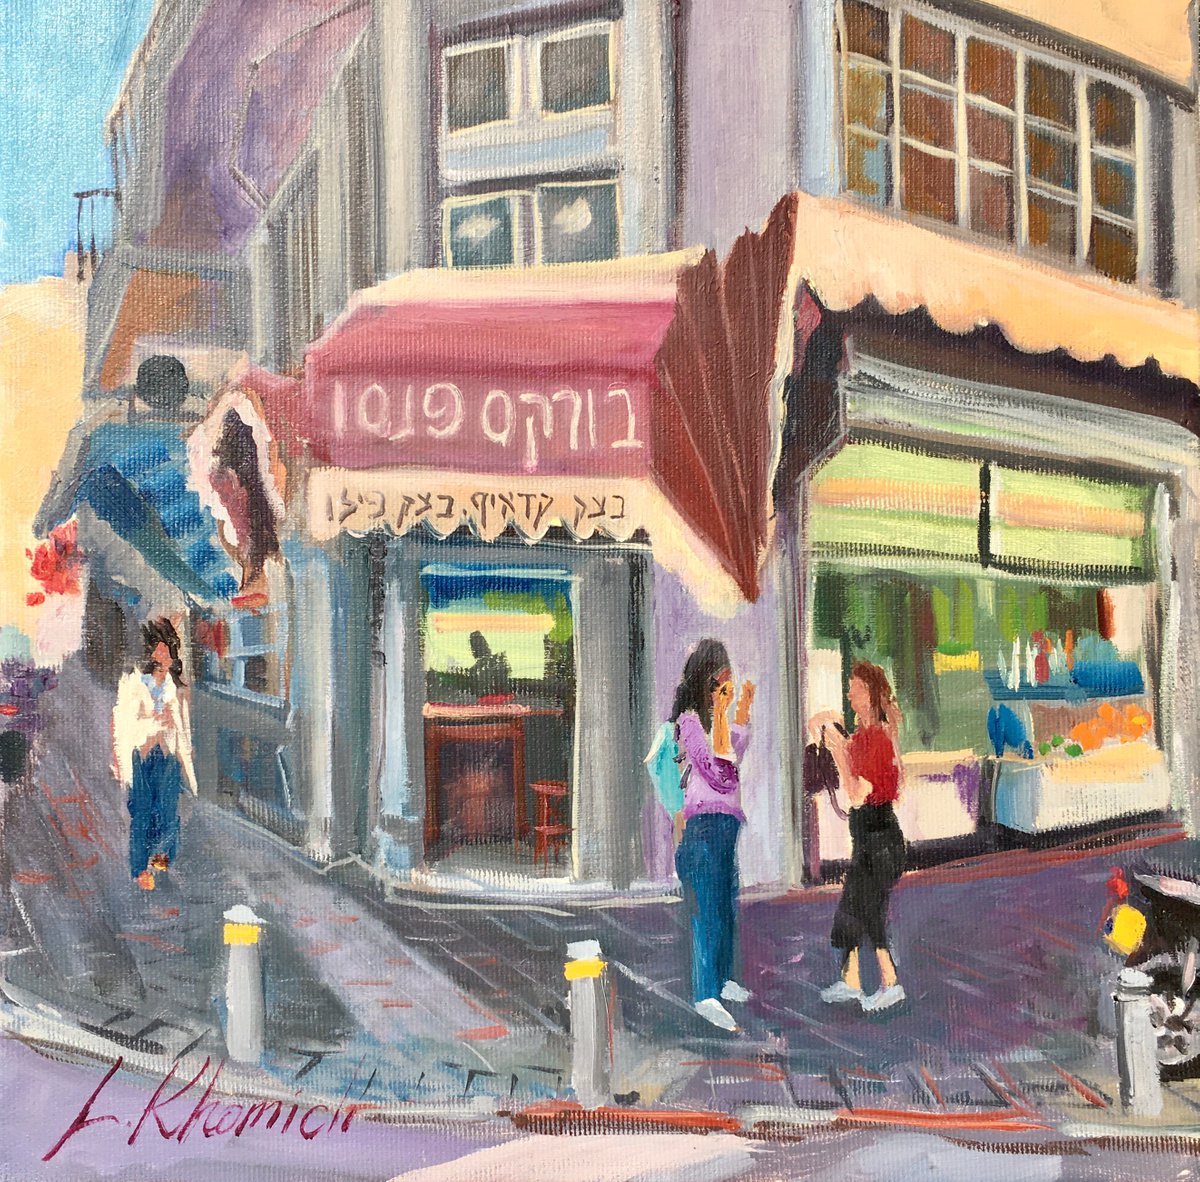 South street cafe in Tel Aviv, Original oil painting by Leo Khomich